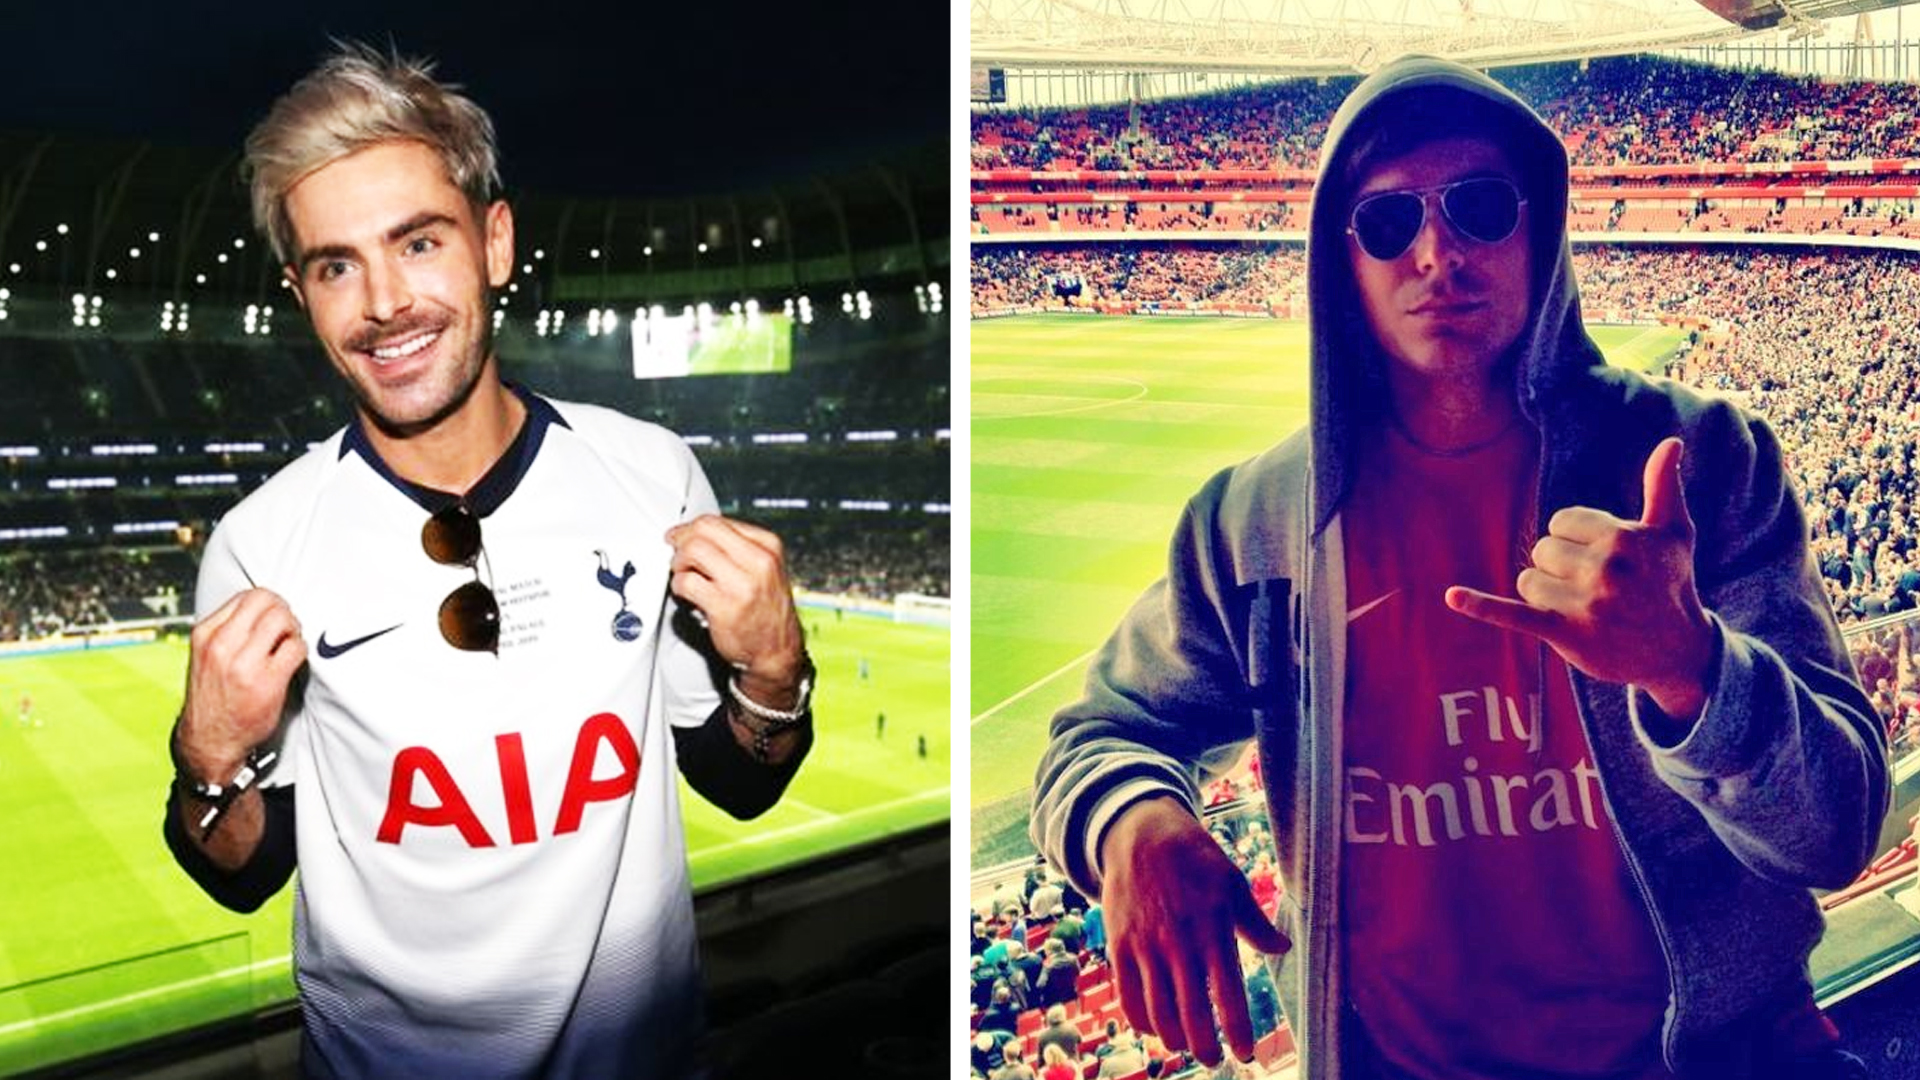 Zac Efron: Does he support Tottenham Hotspur or Arsenal? - CBBC Newsround